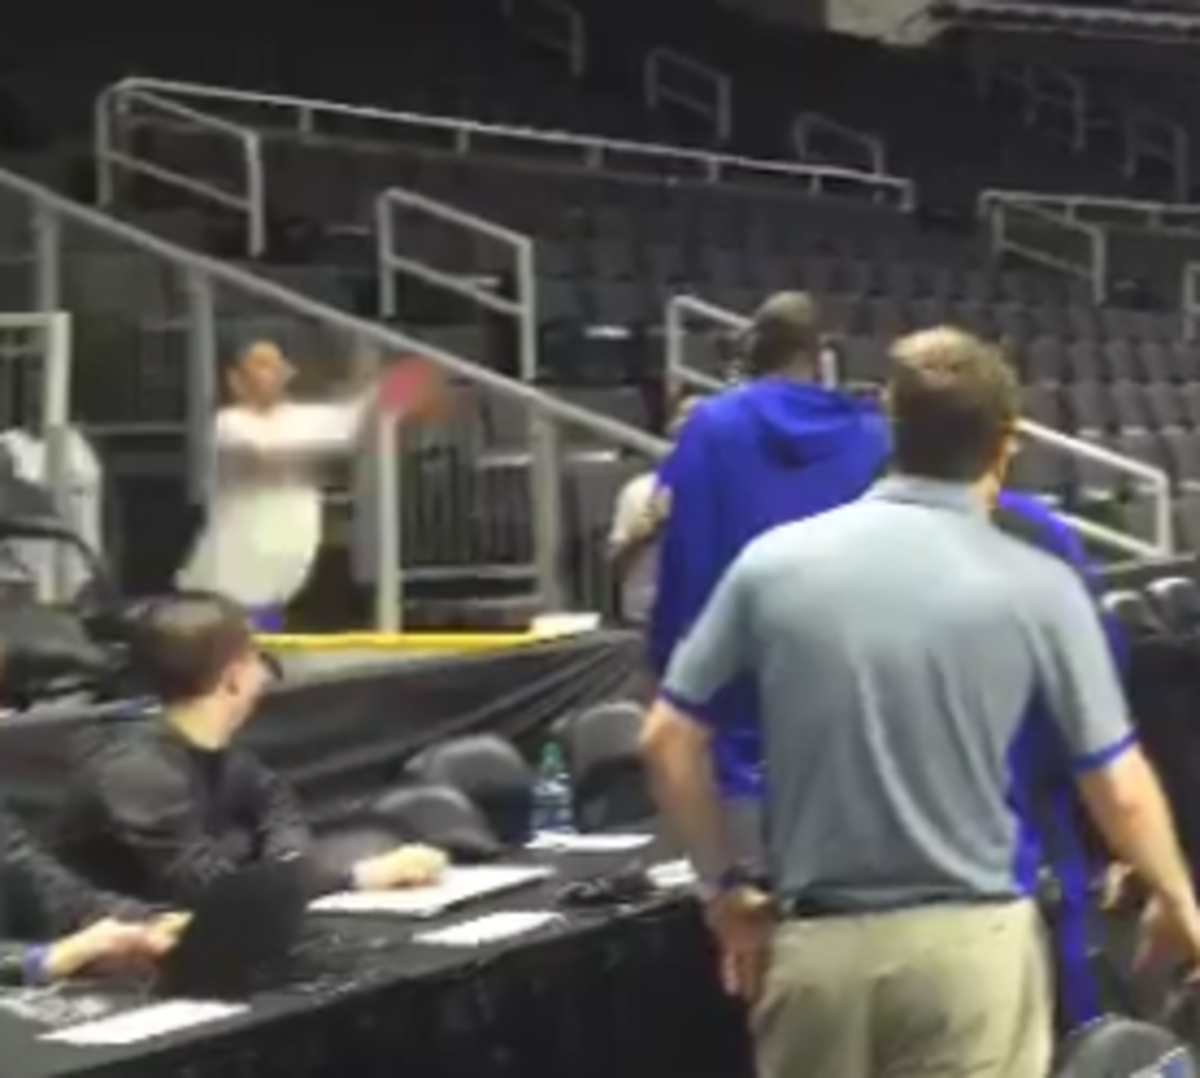 Jeff Capel hits a "Steph Curry" tunnel shot during Duke's practice.